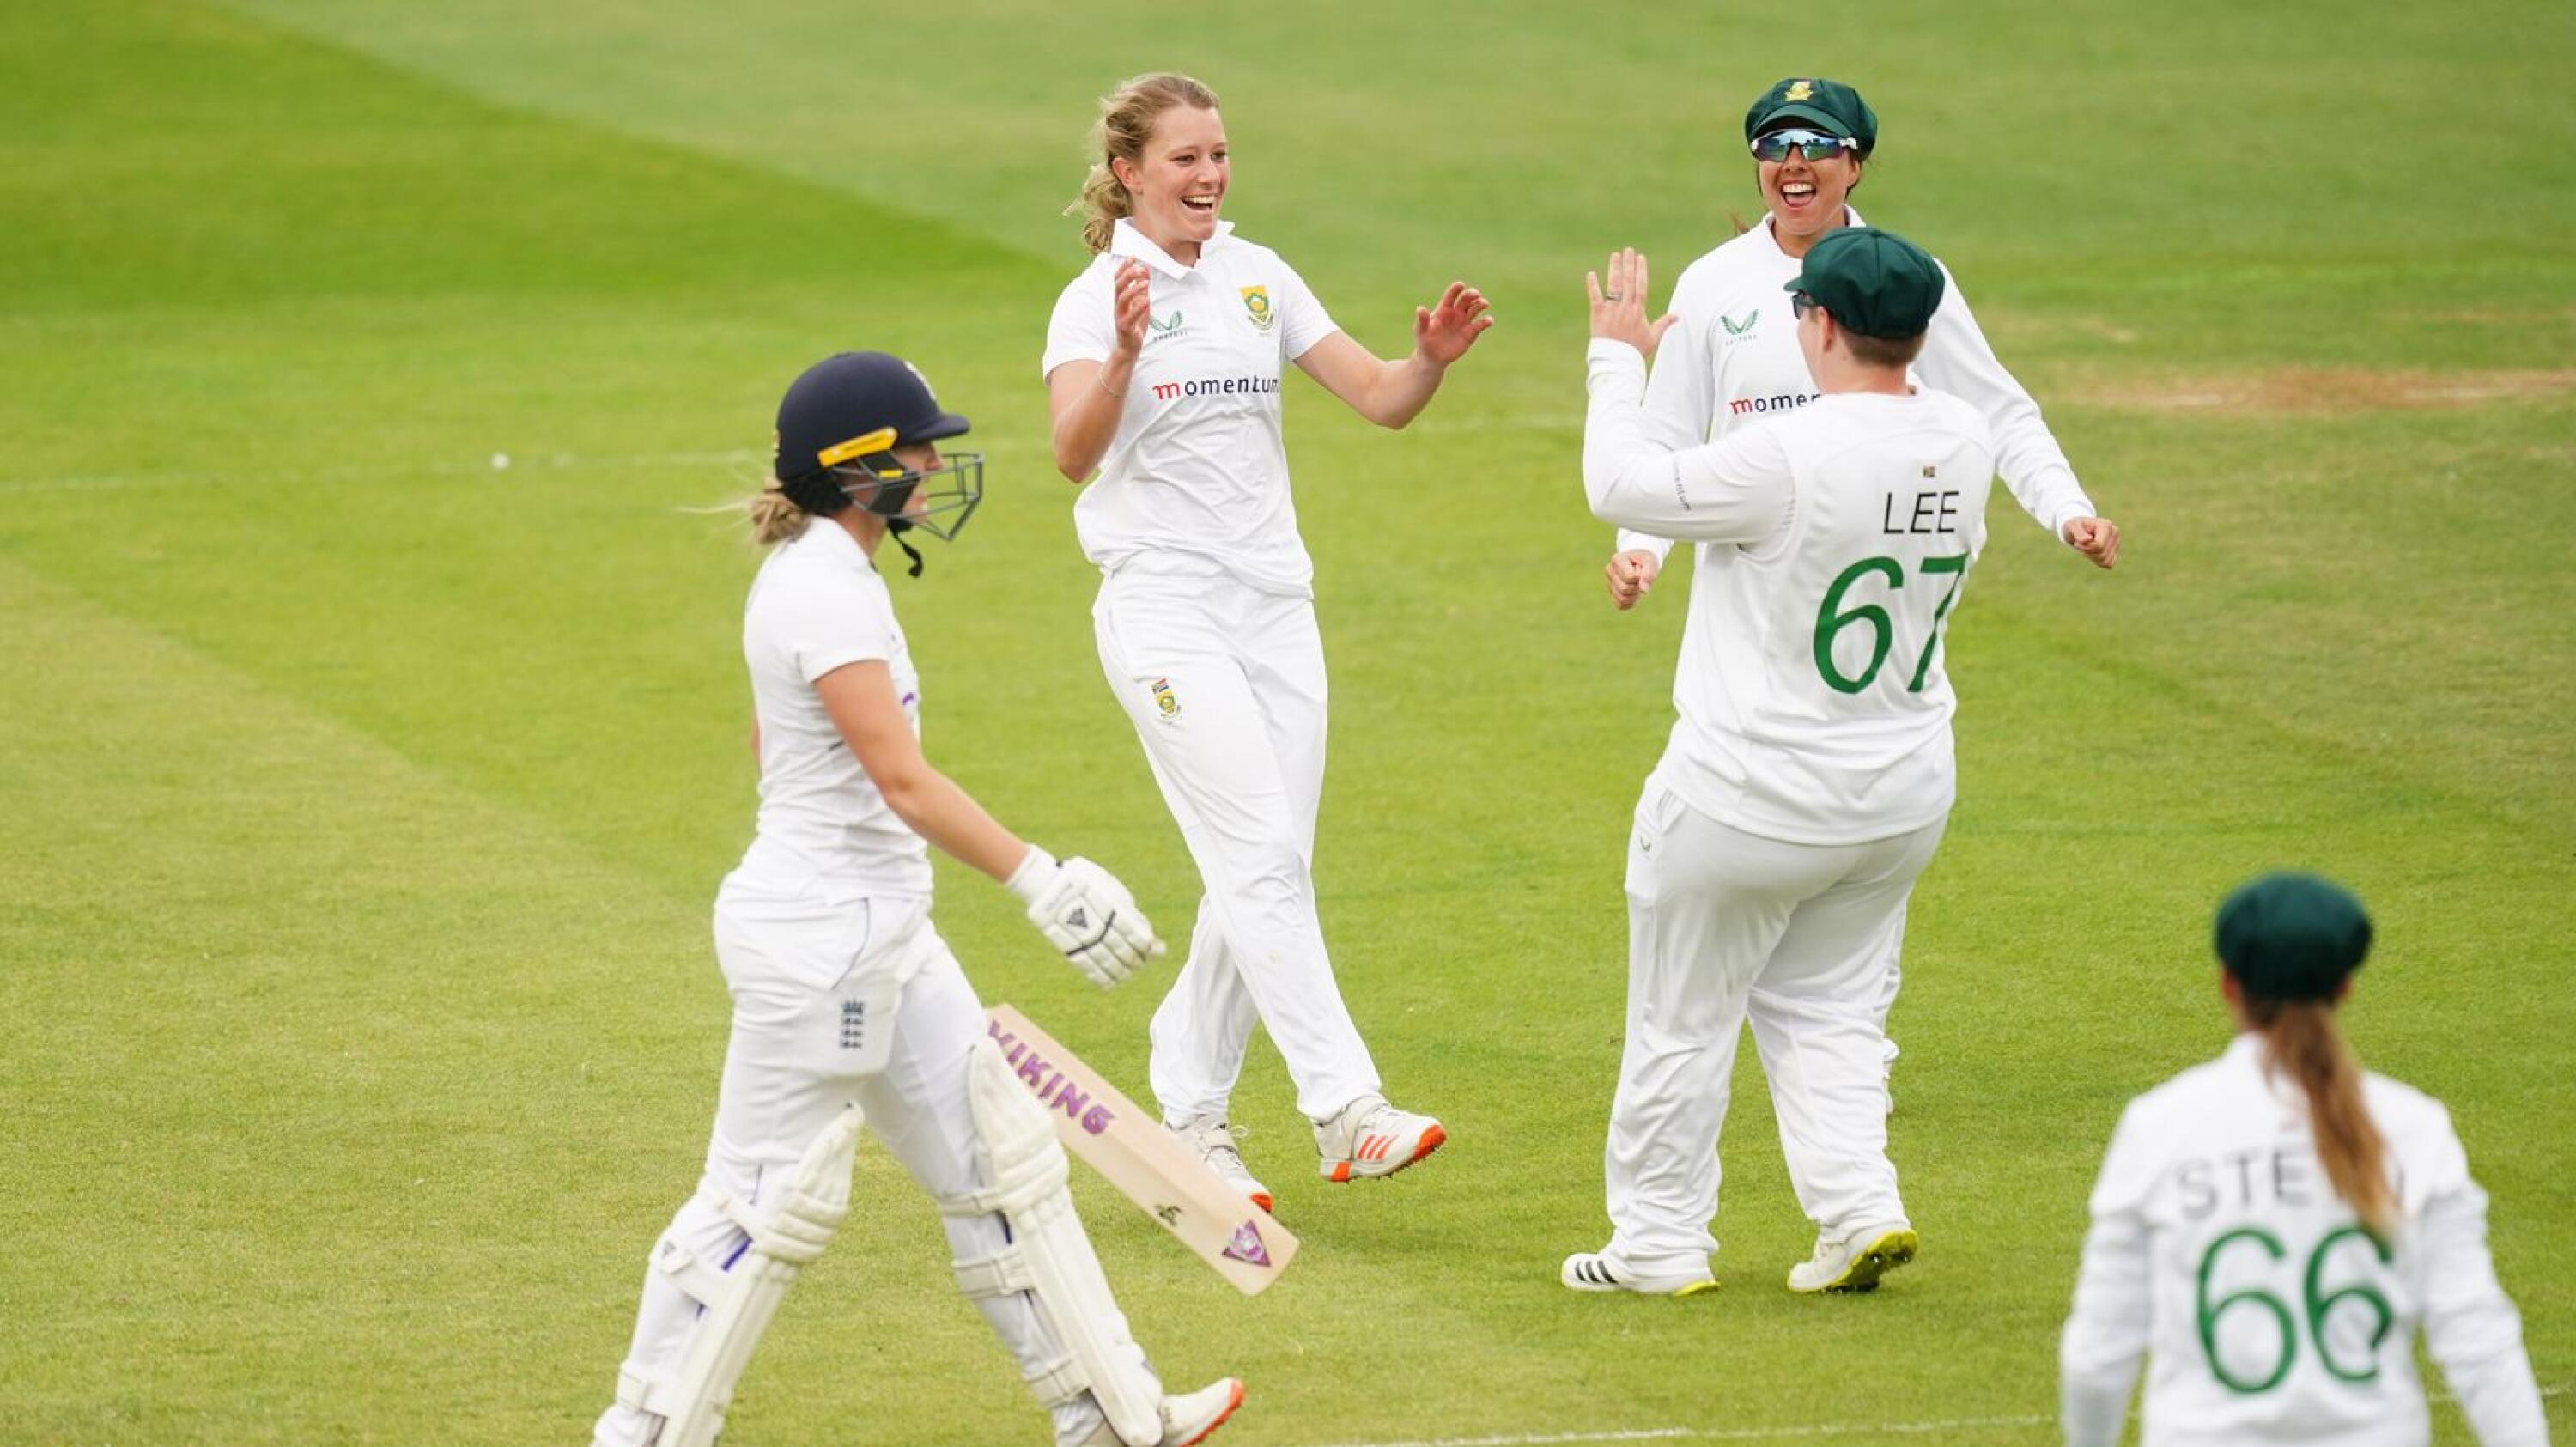 England's Emma Lamb is bowled by South Africa's Anneke Bosch during day two of the Women's test match at The Cooper Associates County Ground, Taunton on Tuesday